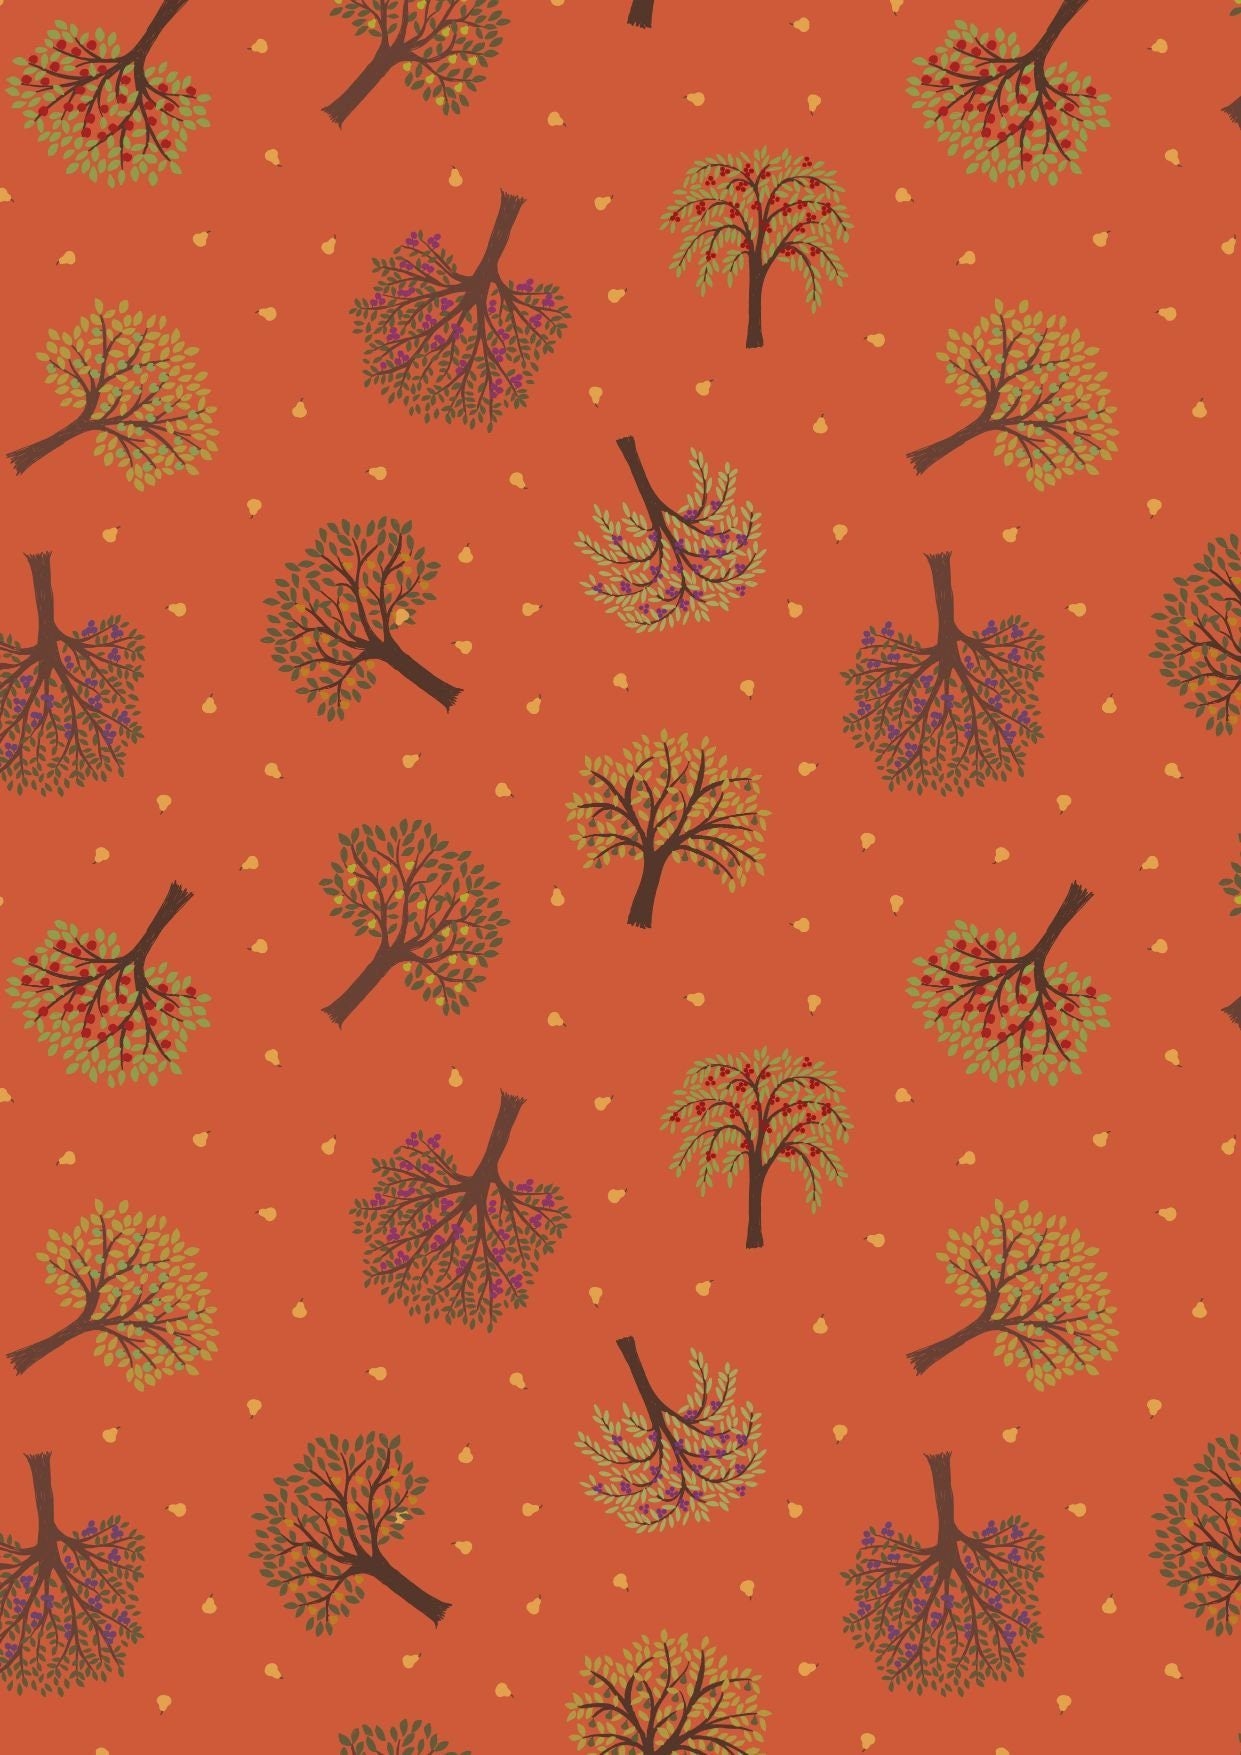 The Orchard Trees on Burnt Orange A497.2 Cotton Woven Fabric